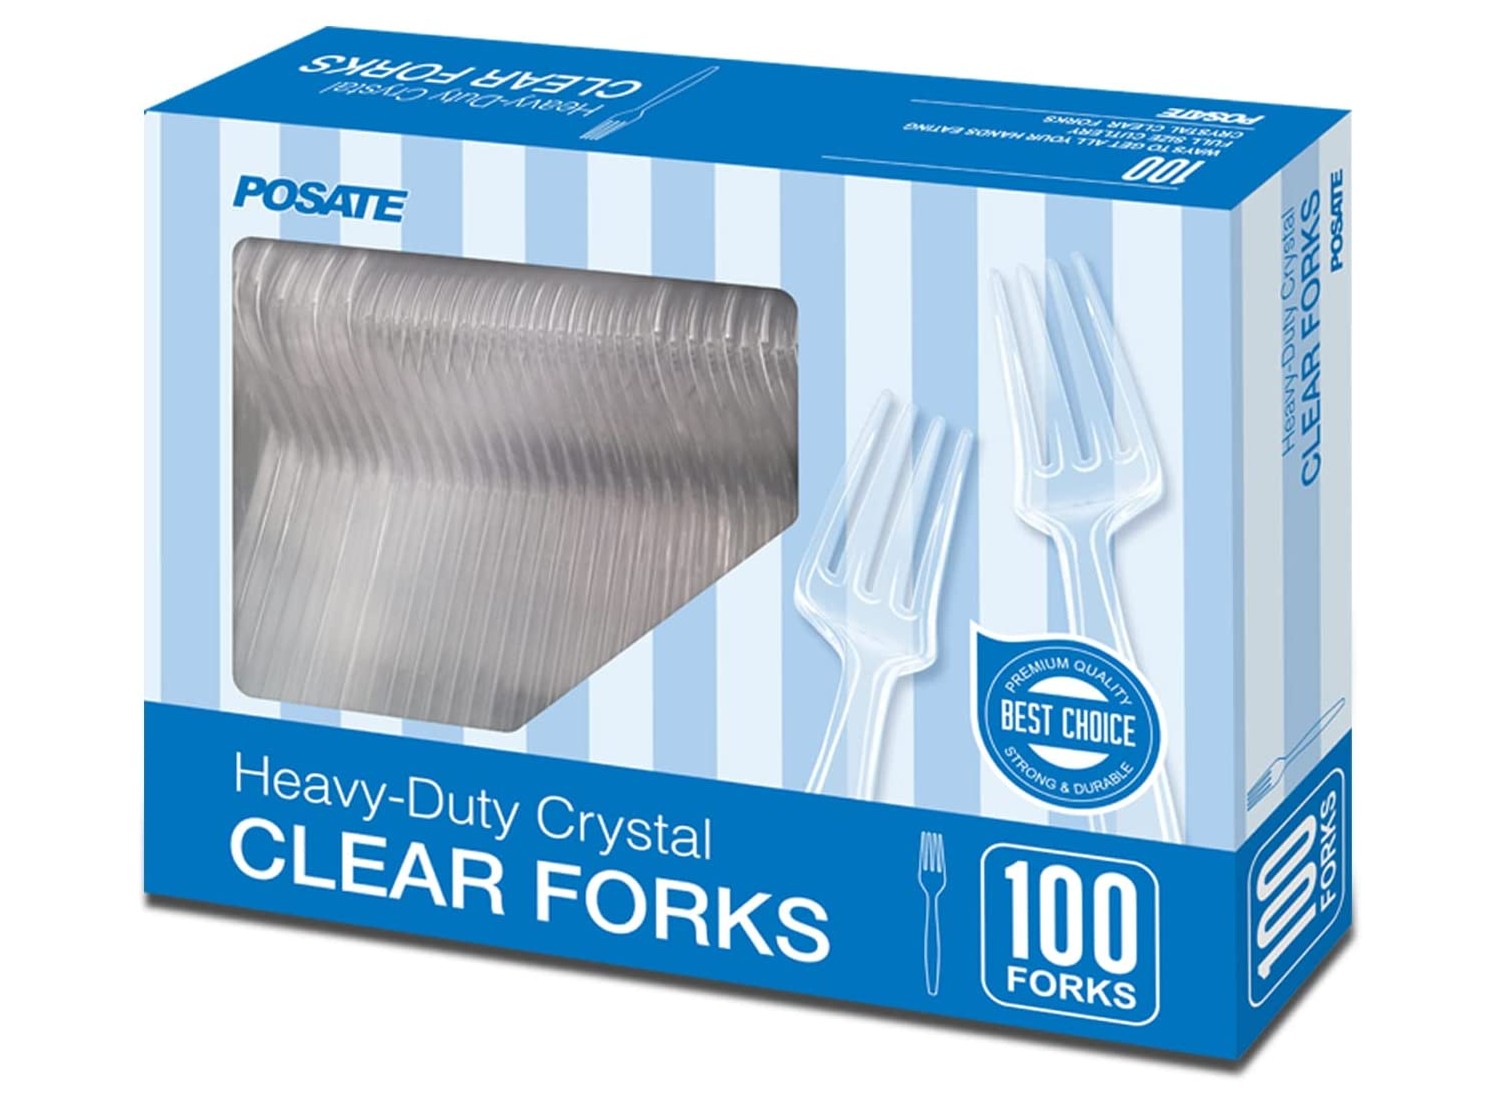 Super Elegant Durable BPA Free 3200ct Plastic Tasting Forks Mini Cocktail or Sampling Fork Set for Hors DOeuvres Appetizers Recyclable 4 Tine Utensil with Stainless Steel Look Shrimp or Seafood 